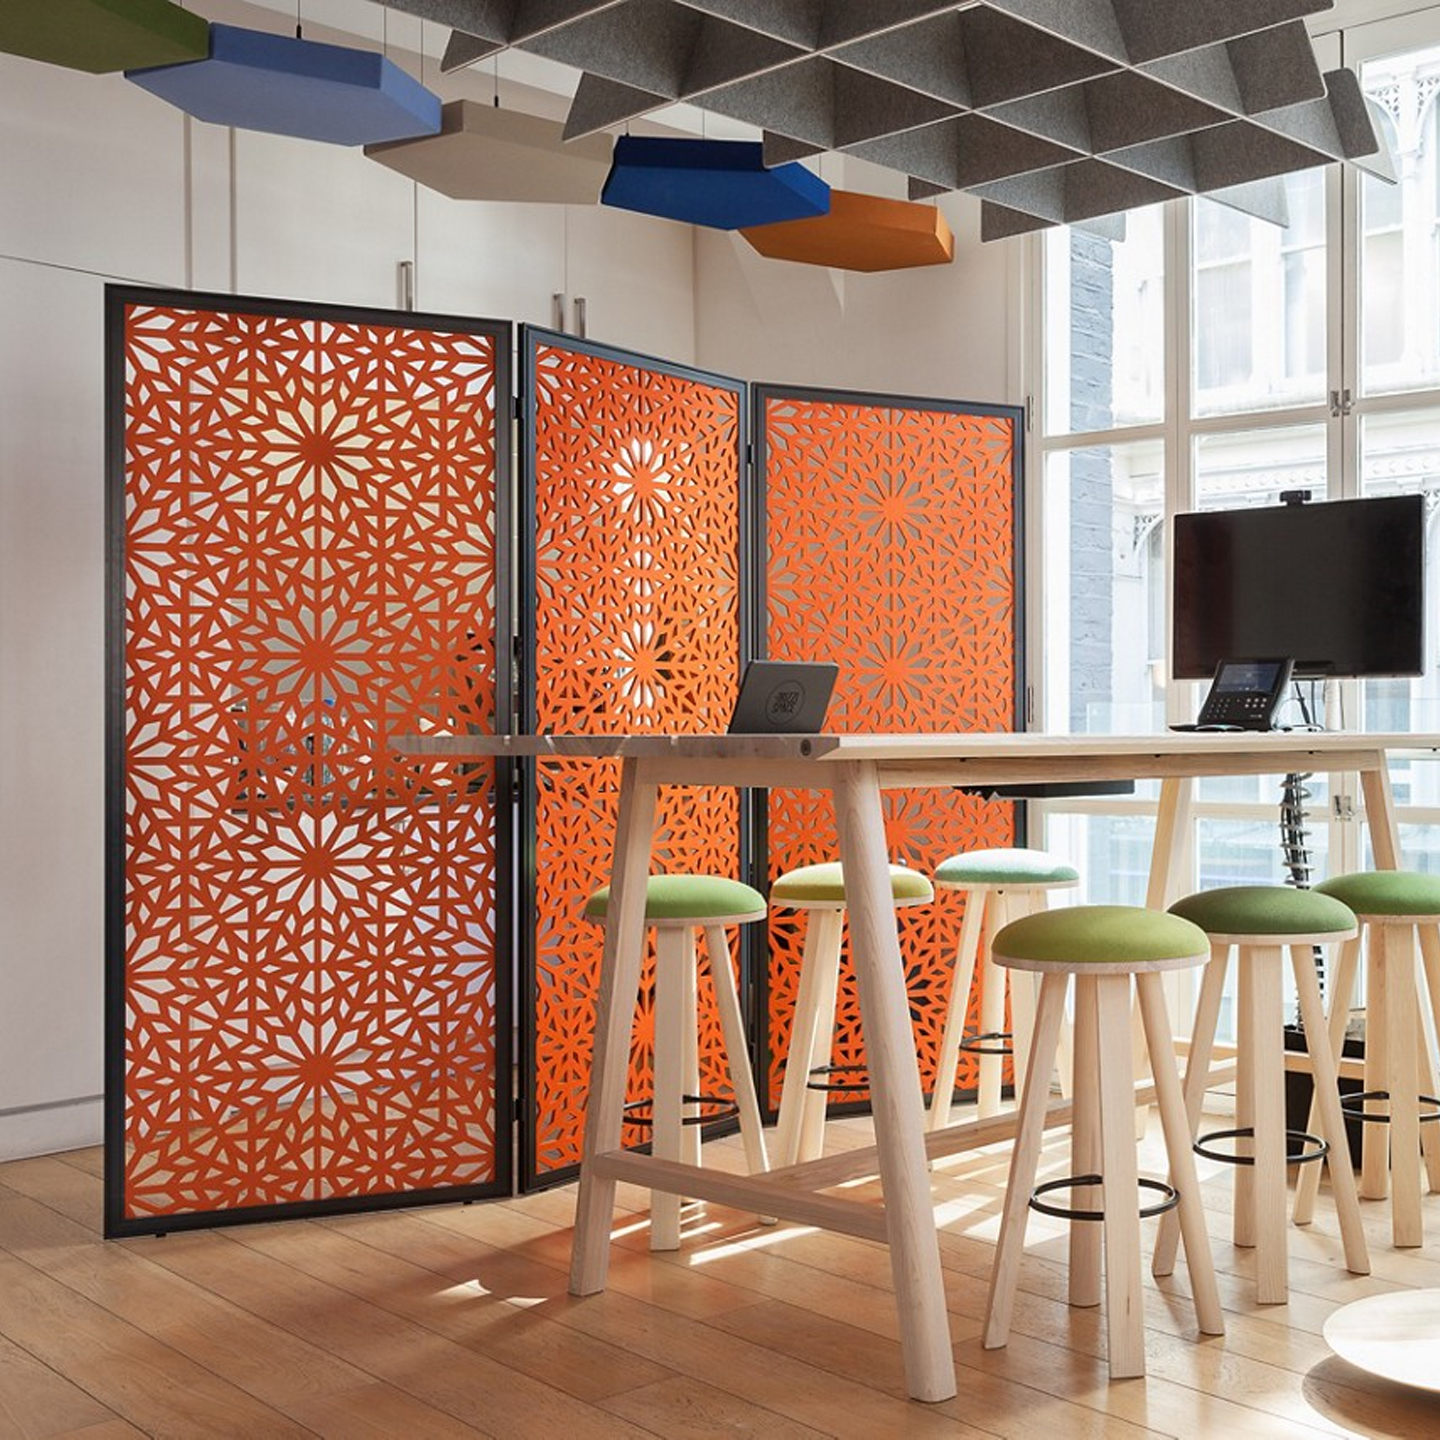 Haworth Buzzifalls Standing screen in orange color with black trim by open collaboration area